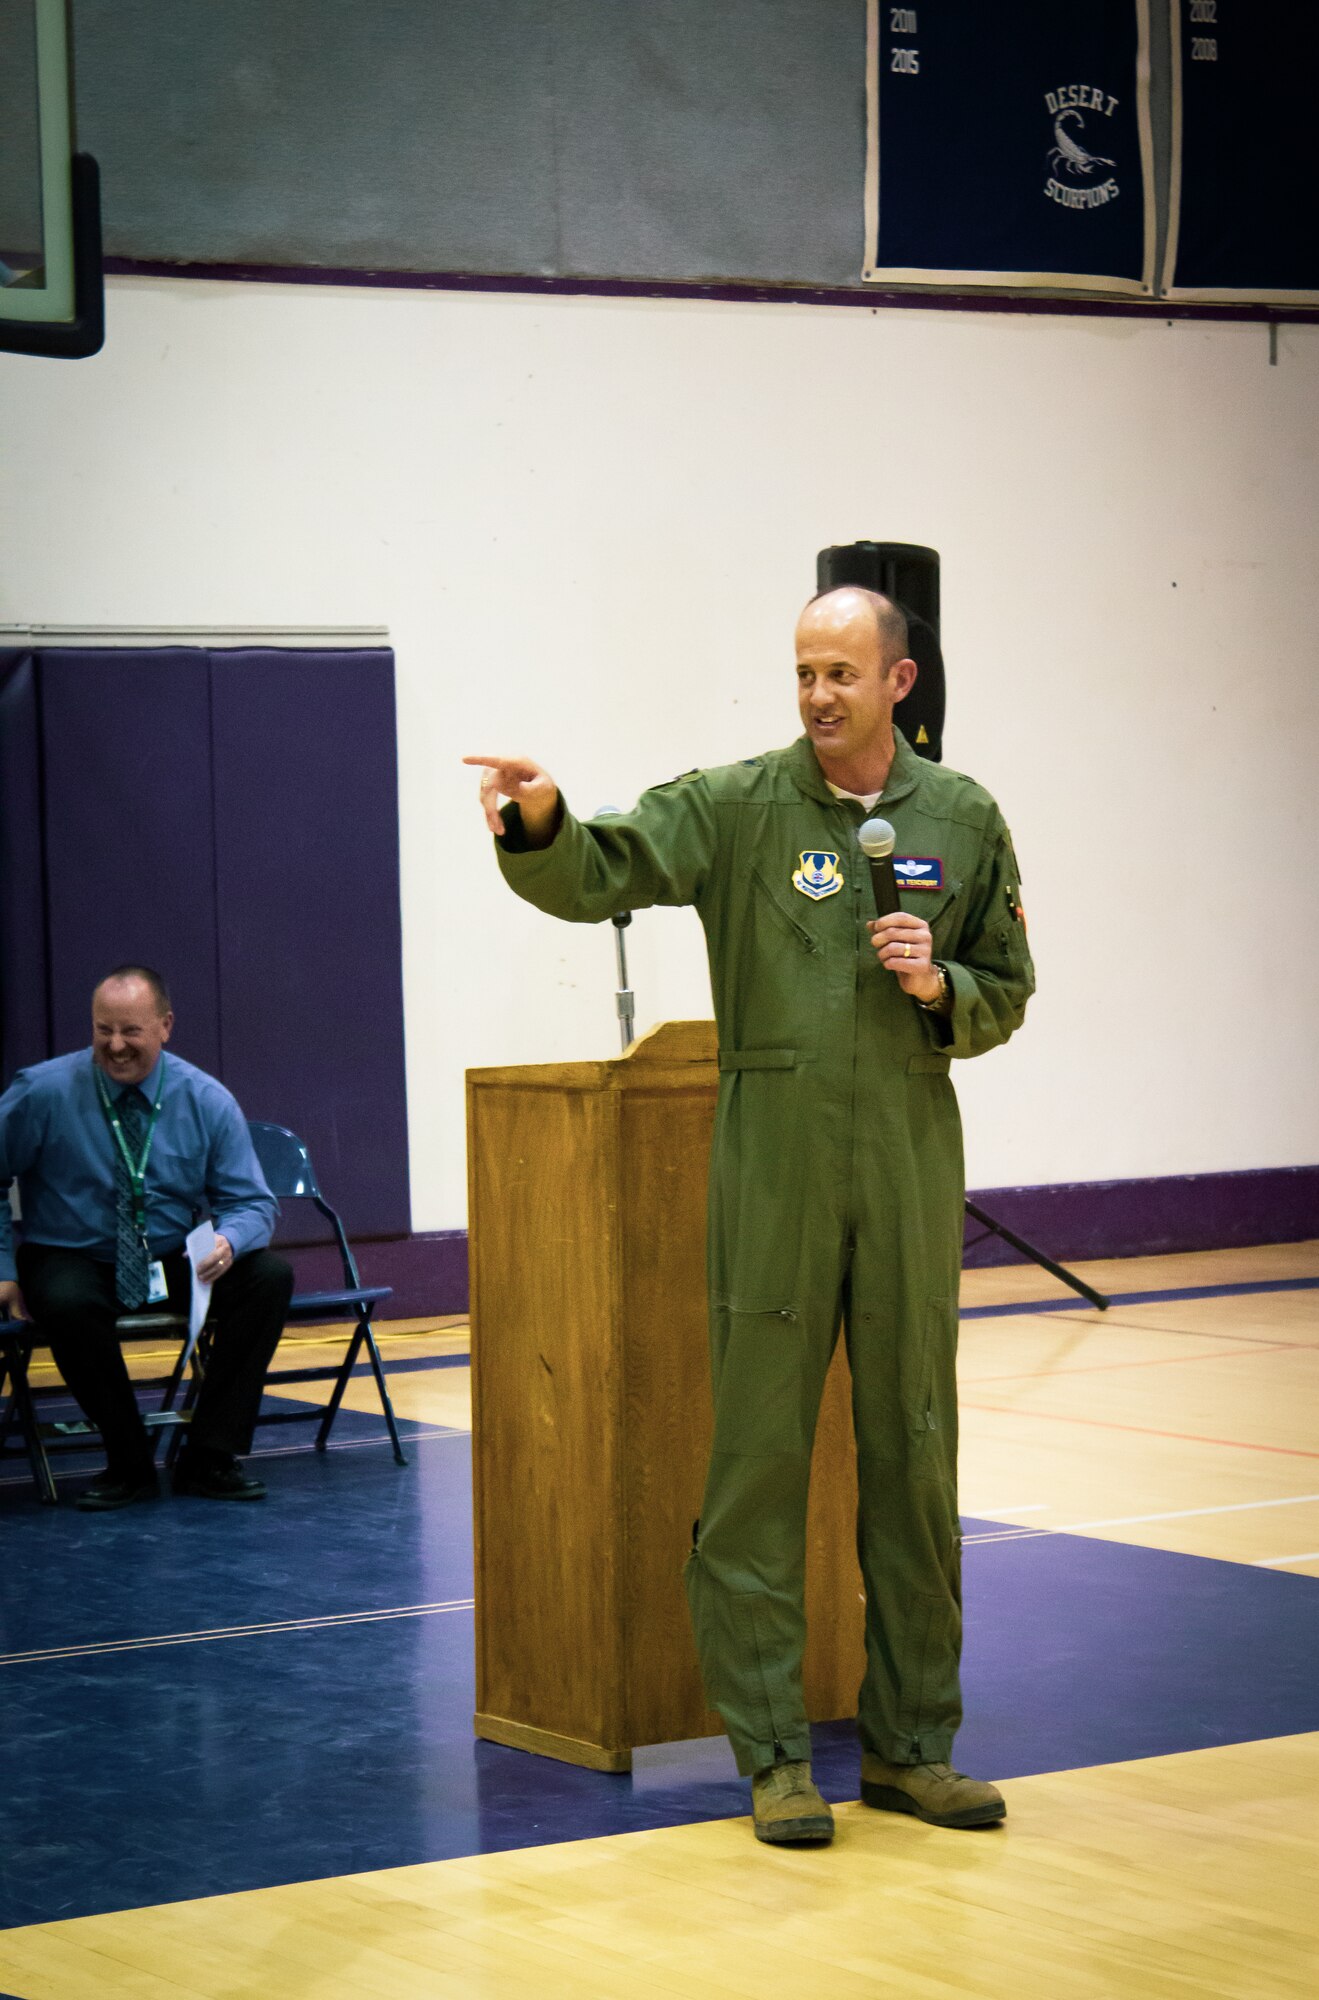 Brig. Gen. E. John Teichert, 412th Test Wing commander, addresses Desert High School students during a pep rally at Edwards Air Force Base, Calif., April 18. Teichert commemorated the Month of the Military Child by personnally thanking the students for their service and support of their parents. (U.S. Air Force photo by Jade Black)